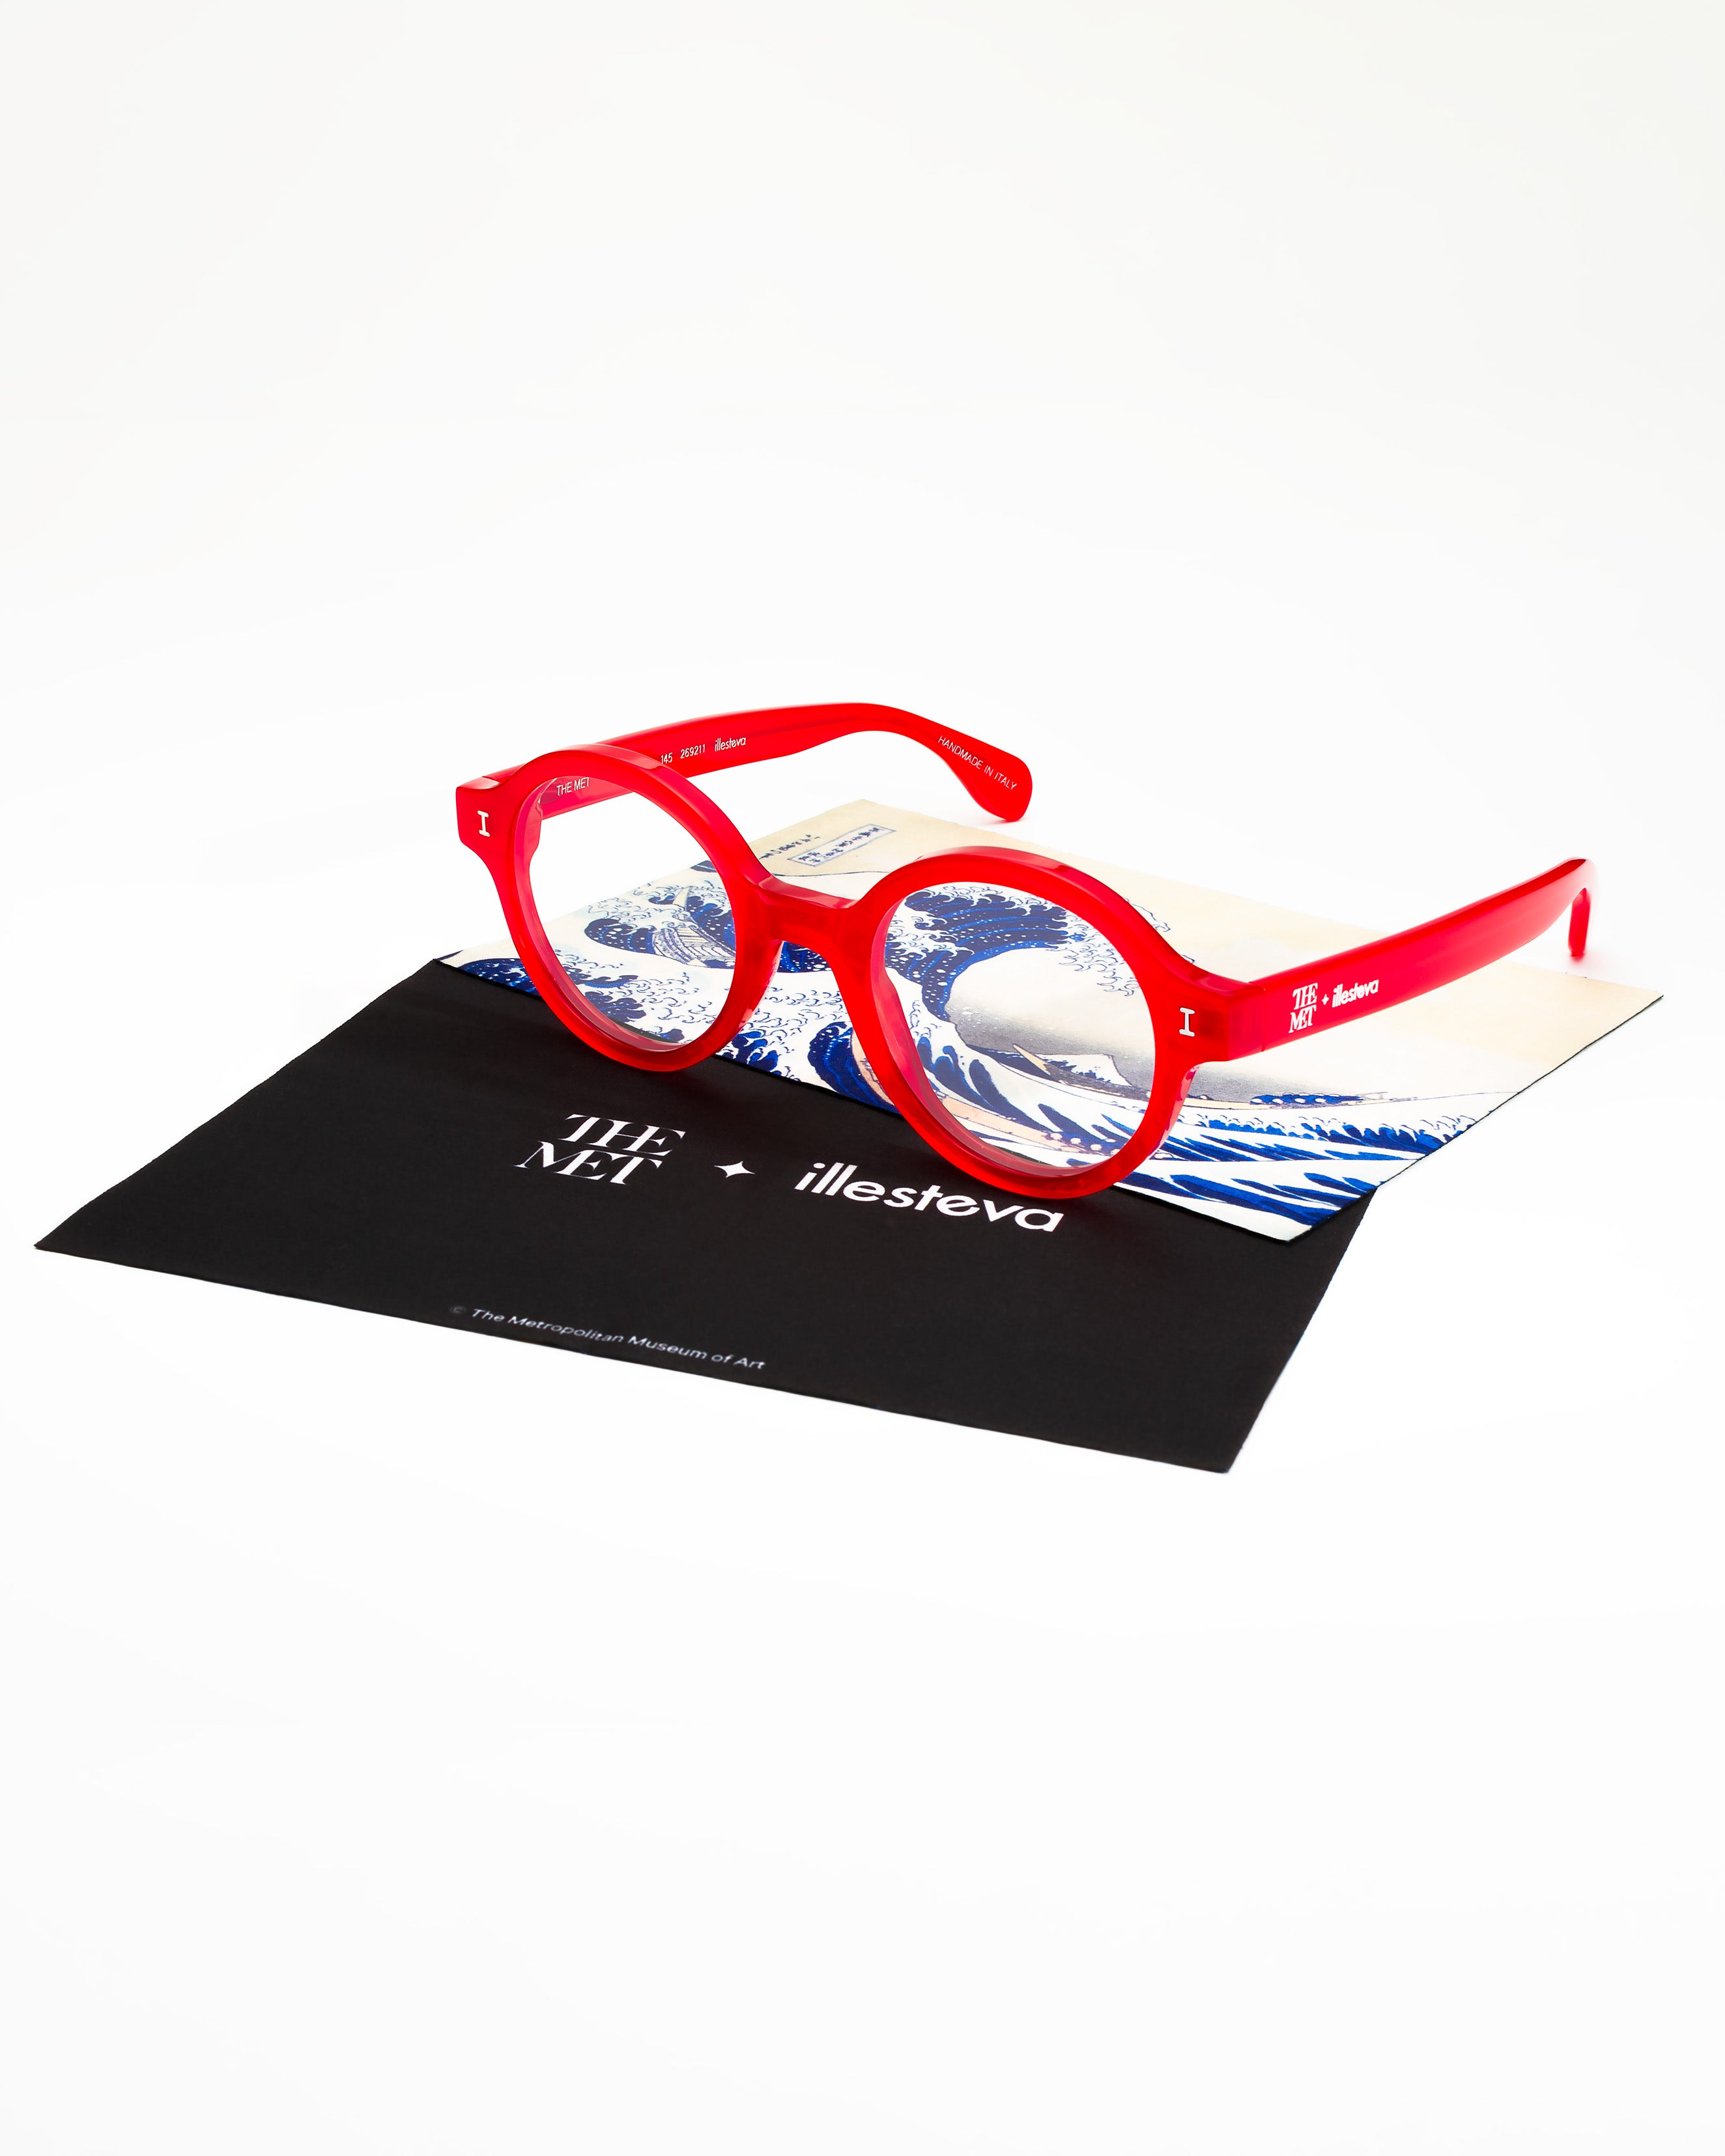 The Met x illesteva Optical displayed over its limited edition cloth